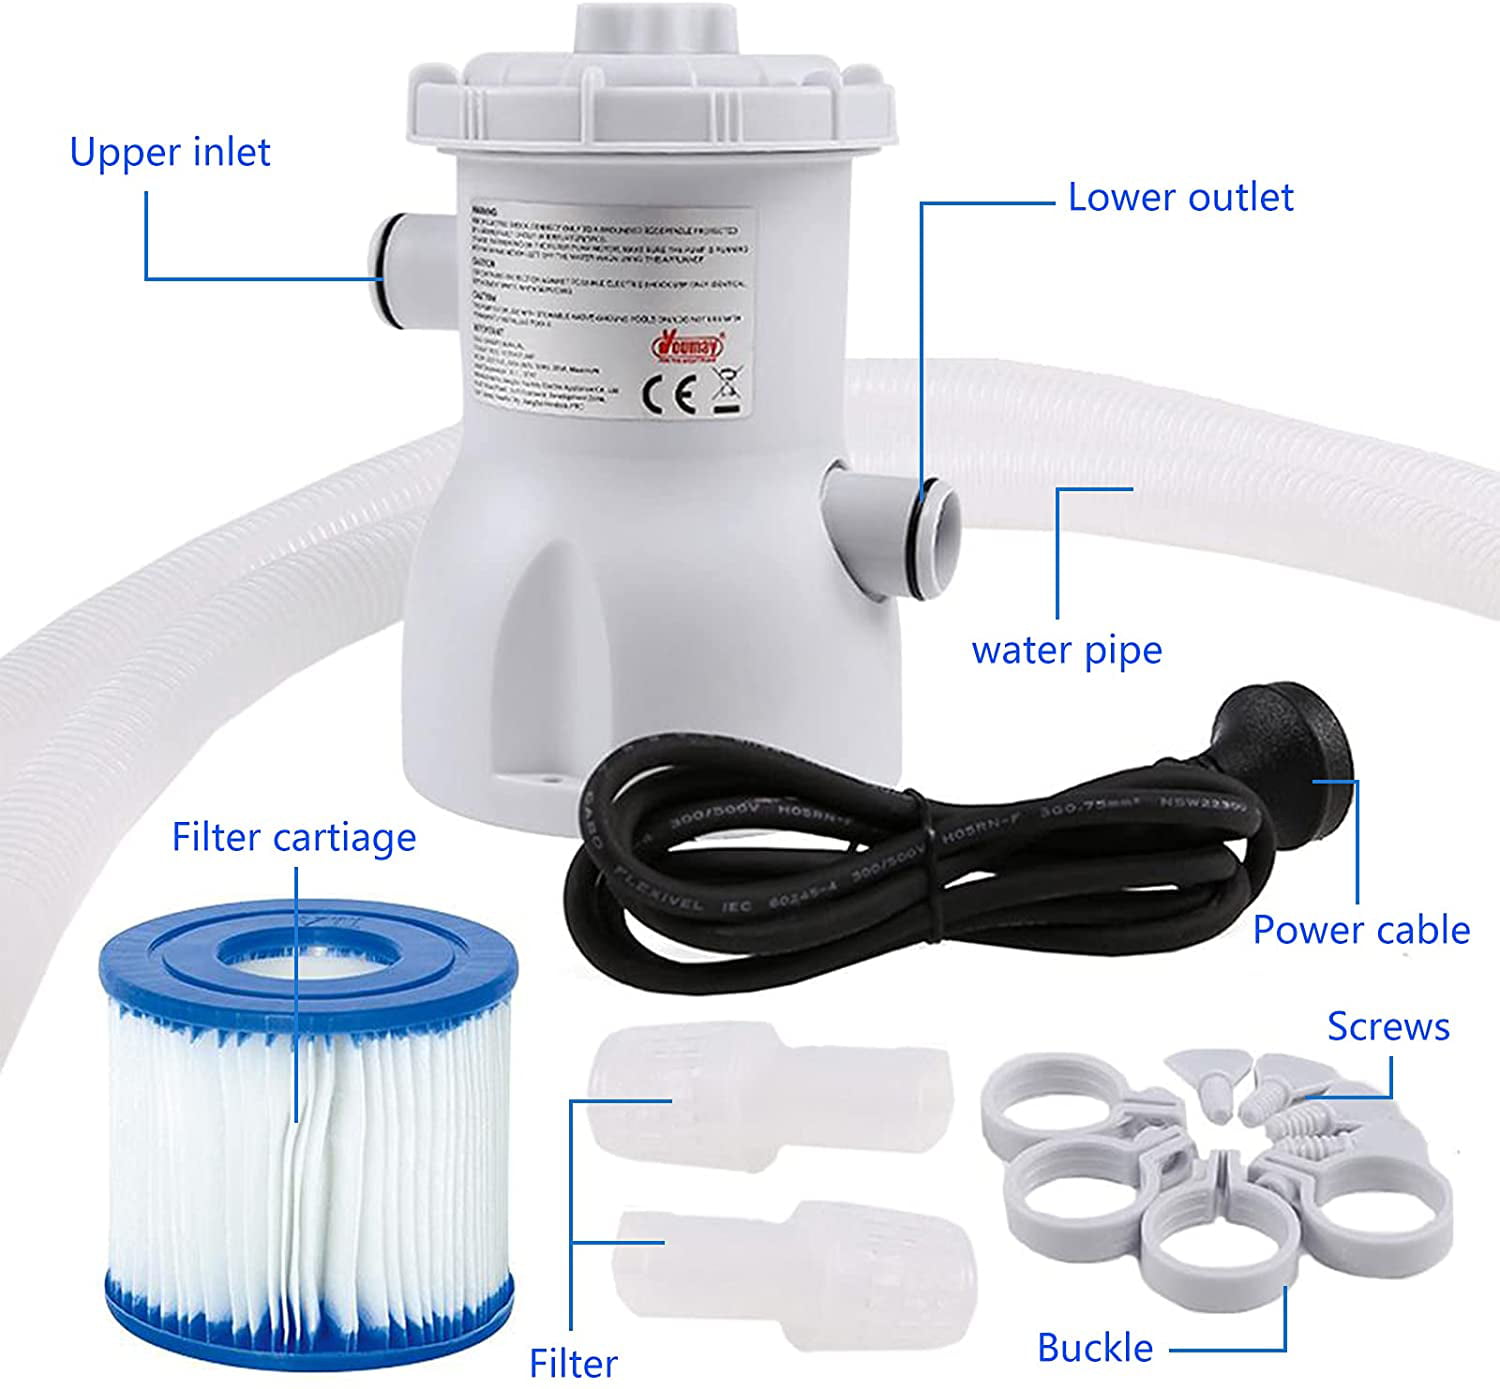 Gearsnug Clear Cartridge Filter Pump for Above Ground Pools Low Maintenance Cost 300 GPH Pump Flow Rate,Mute Small Swimming Pool Filter Pump,Electric Filter Pump,110-120V with GFCI Efficient 